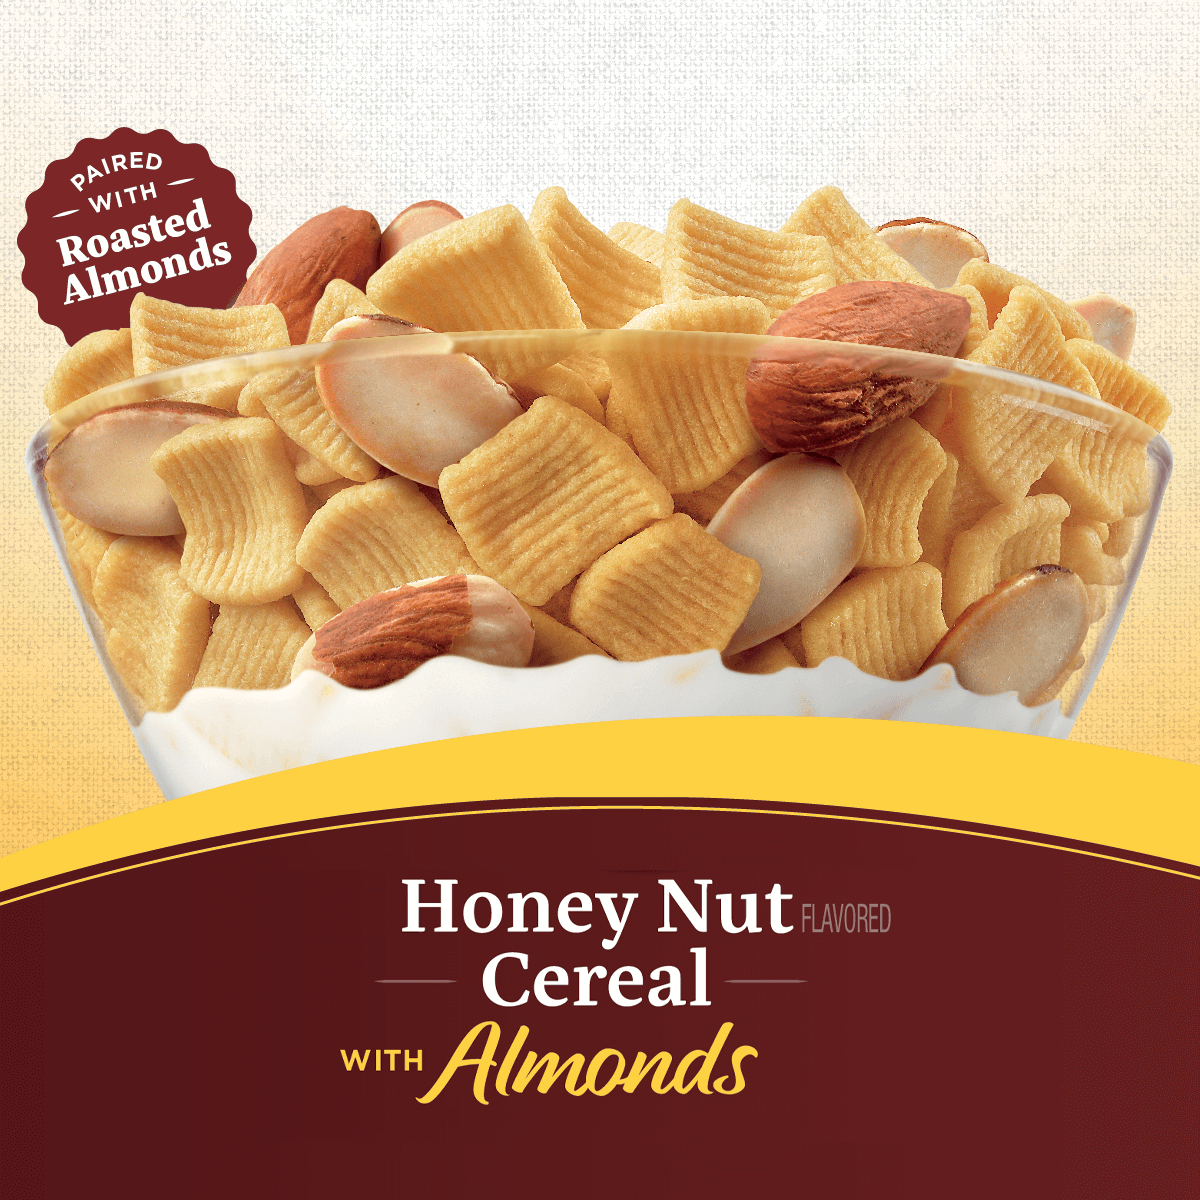 Honey Nut Cereal with Almonds.